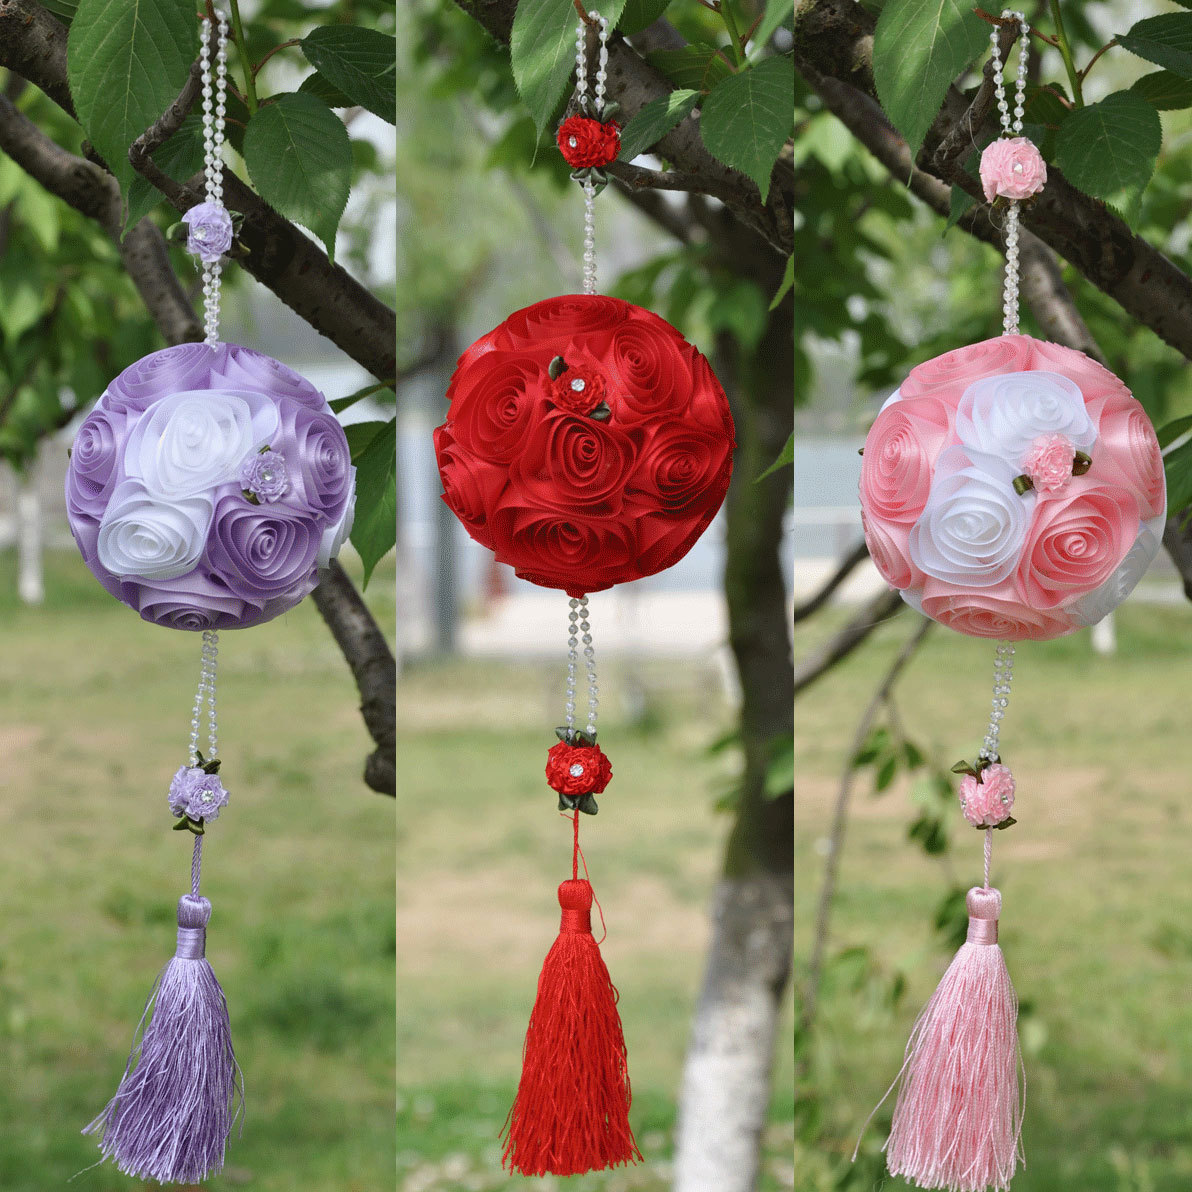 The bride wrist flowers at home decoration rose ball hangings wedding supplies 100g